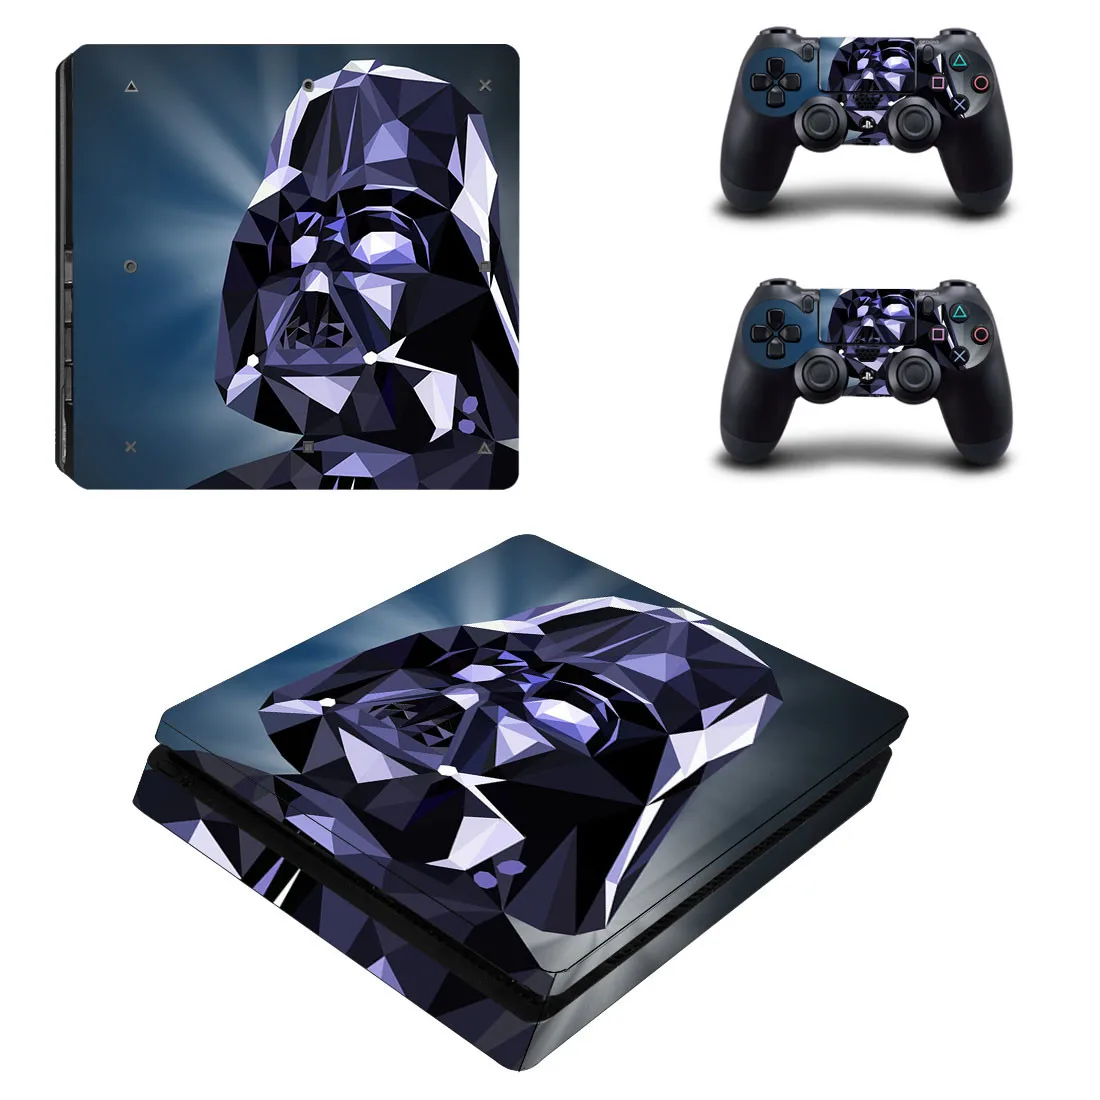 Star Wars PS4 Slim Stickers Play station 4 Skin Sticker Decals For PlayStation 4 PS4 Slim Console and Controller Skins Vinyl